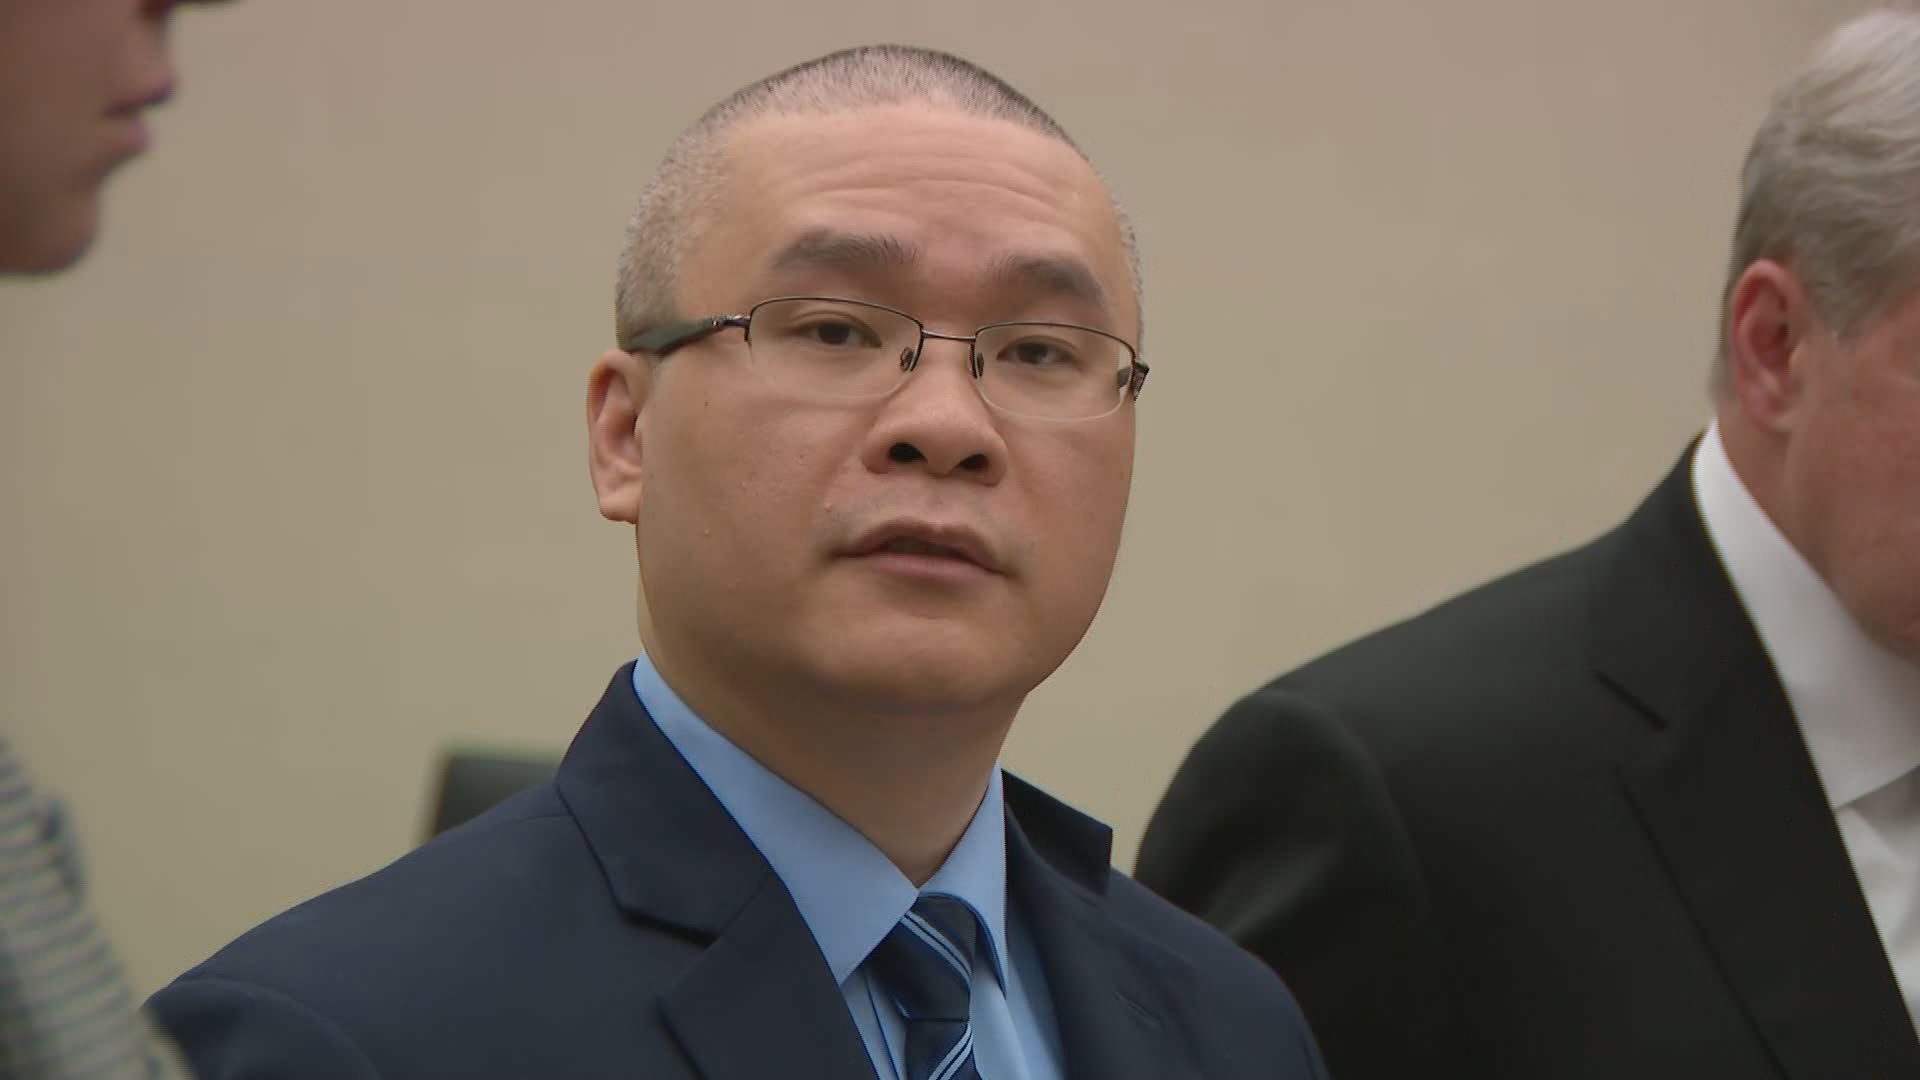 Citing his lack of remorse, Judge Peter Cahill opted for the top of state sentencing guidelines in handing Thao a 4.75-year sentence.